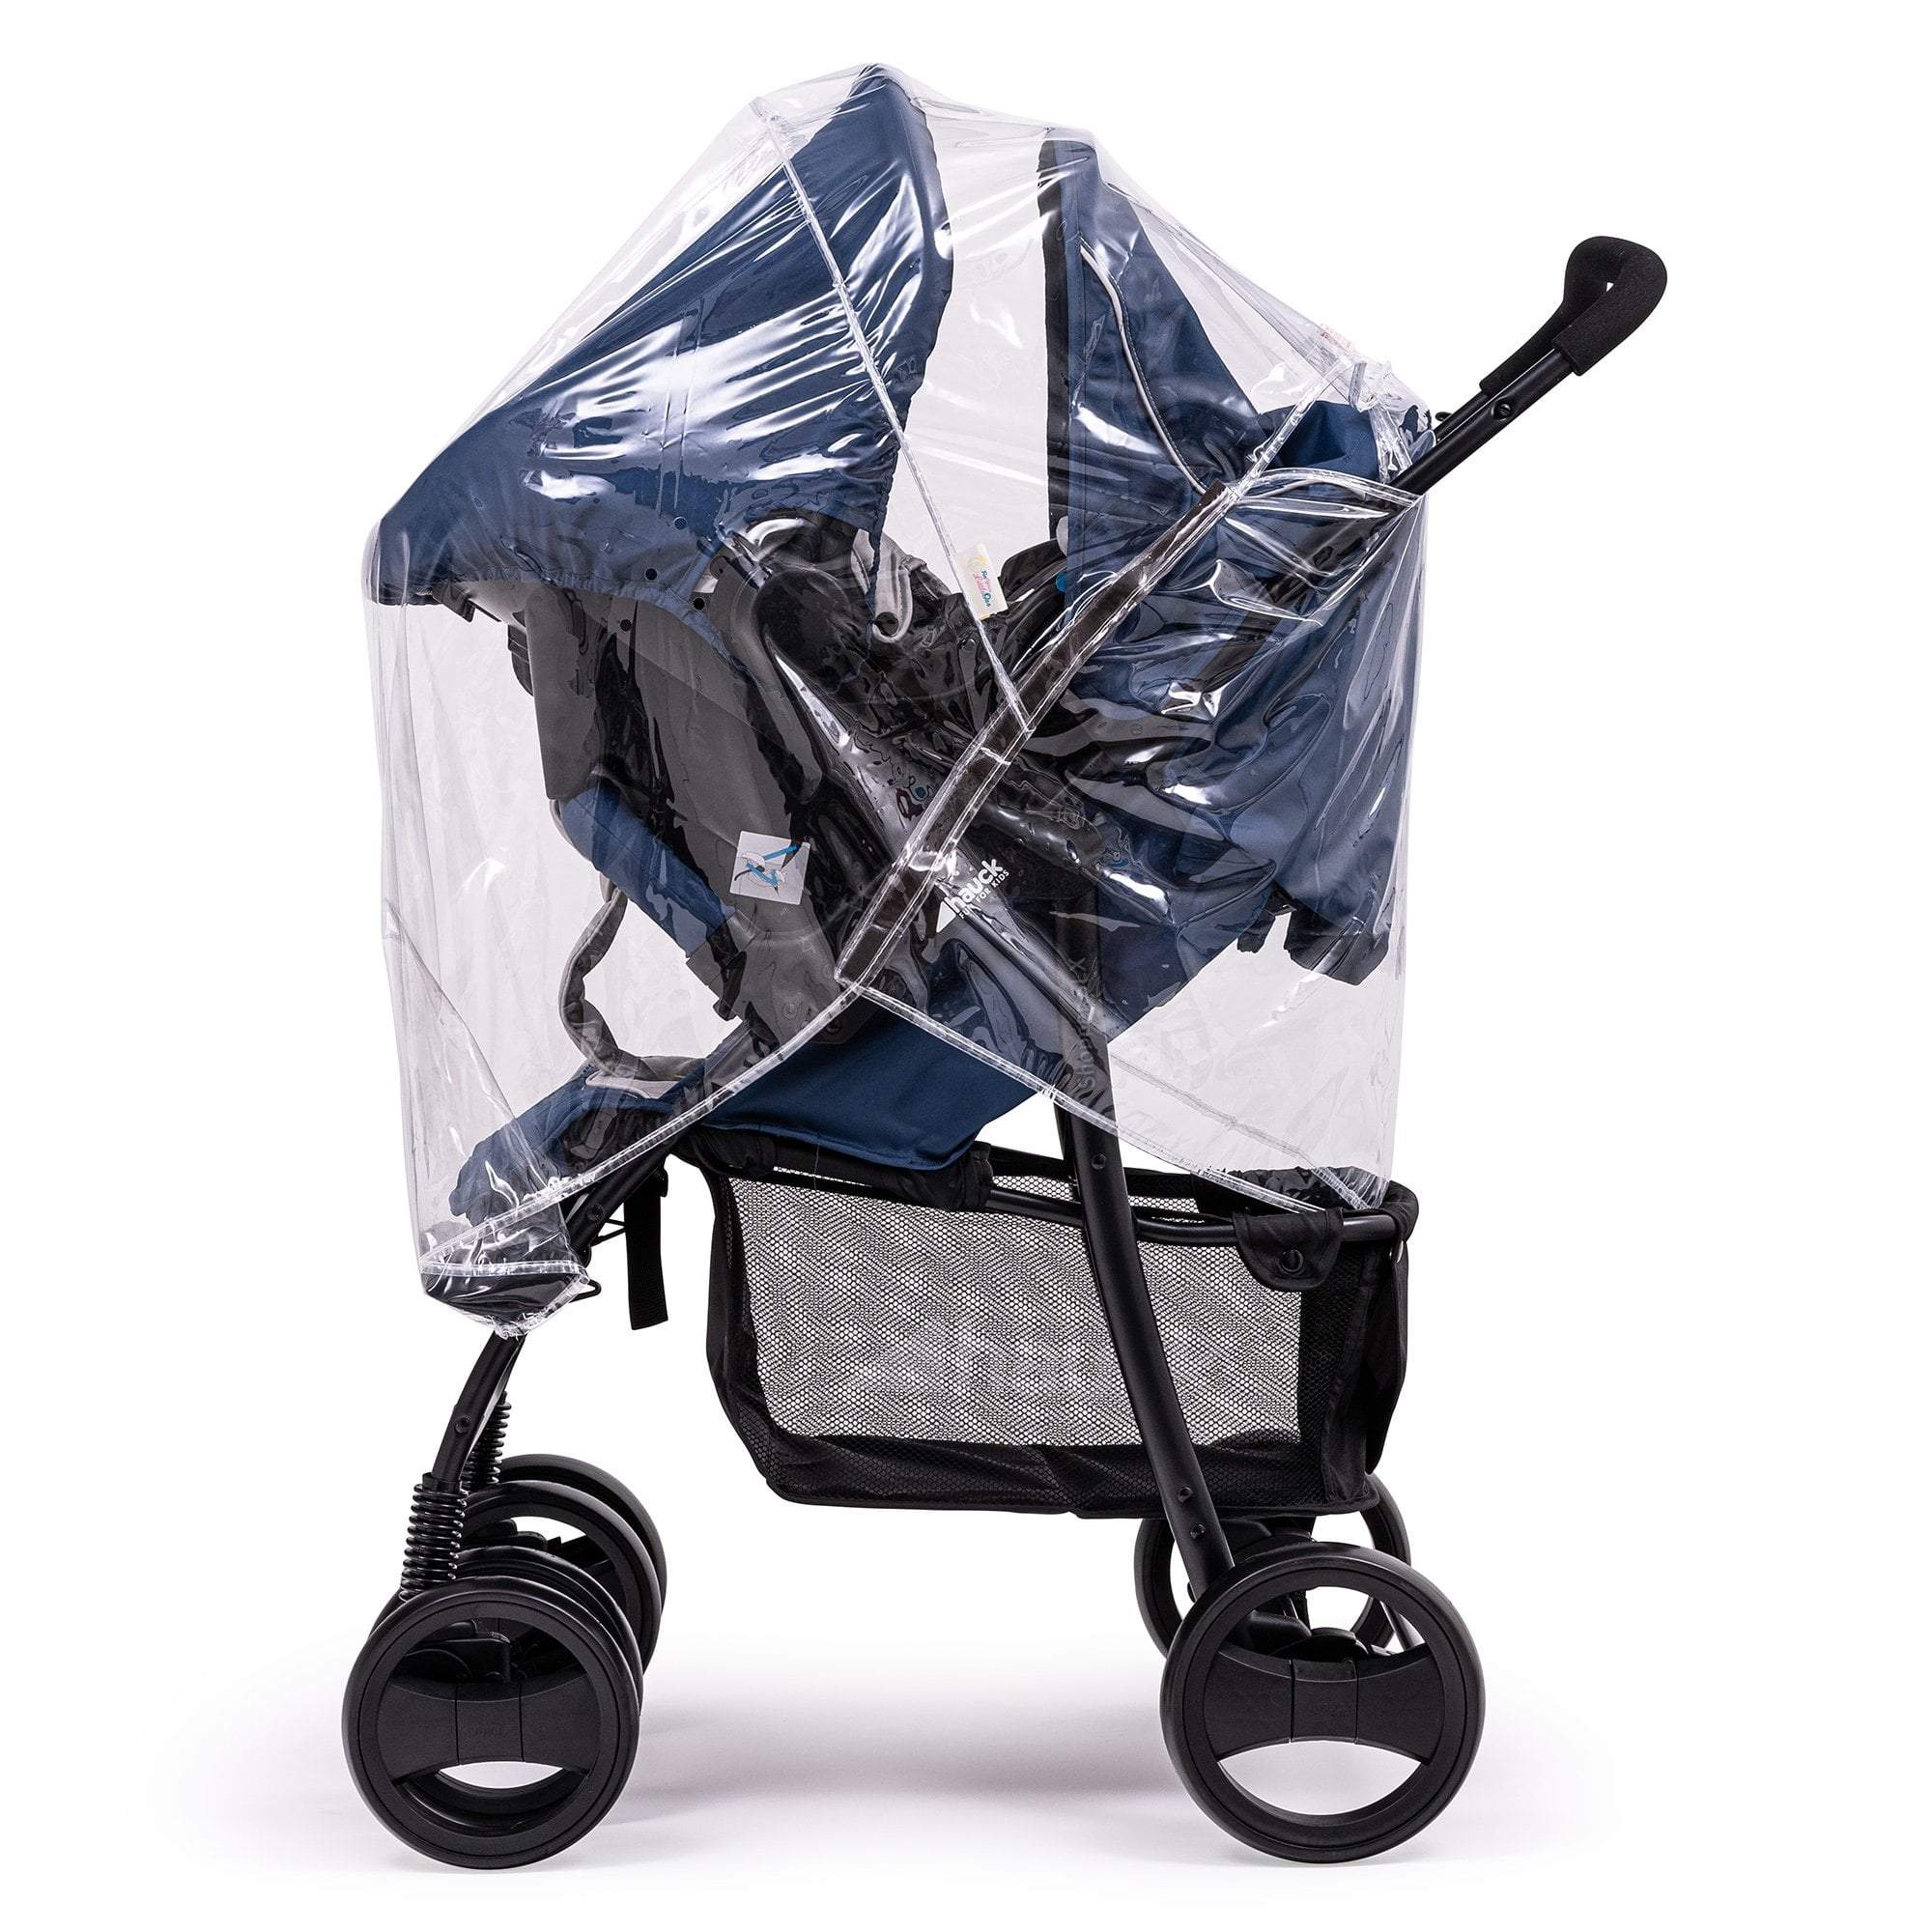 Travel System Raincover Compatible with Formula - Fits All Models - For Your Little One